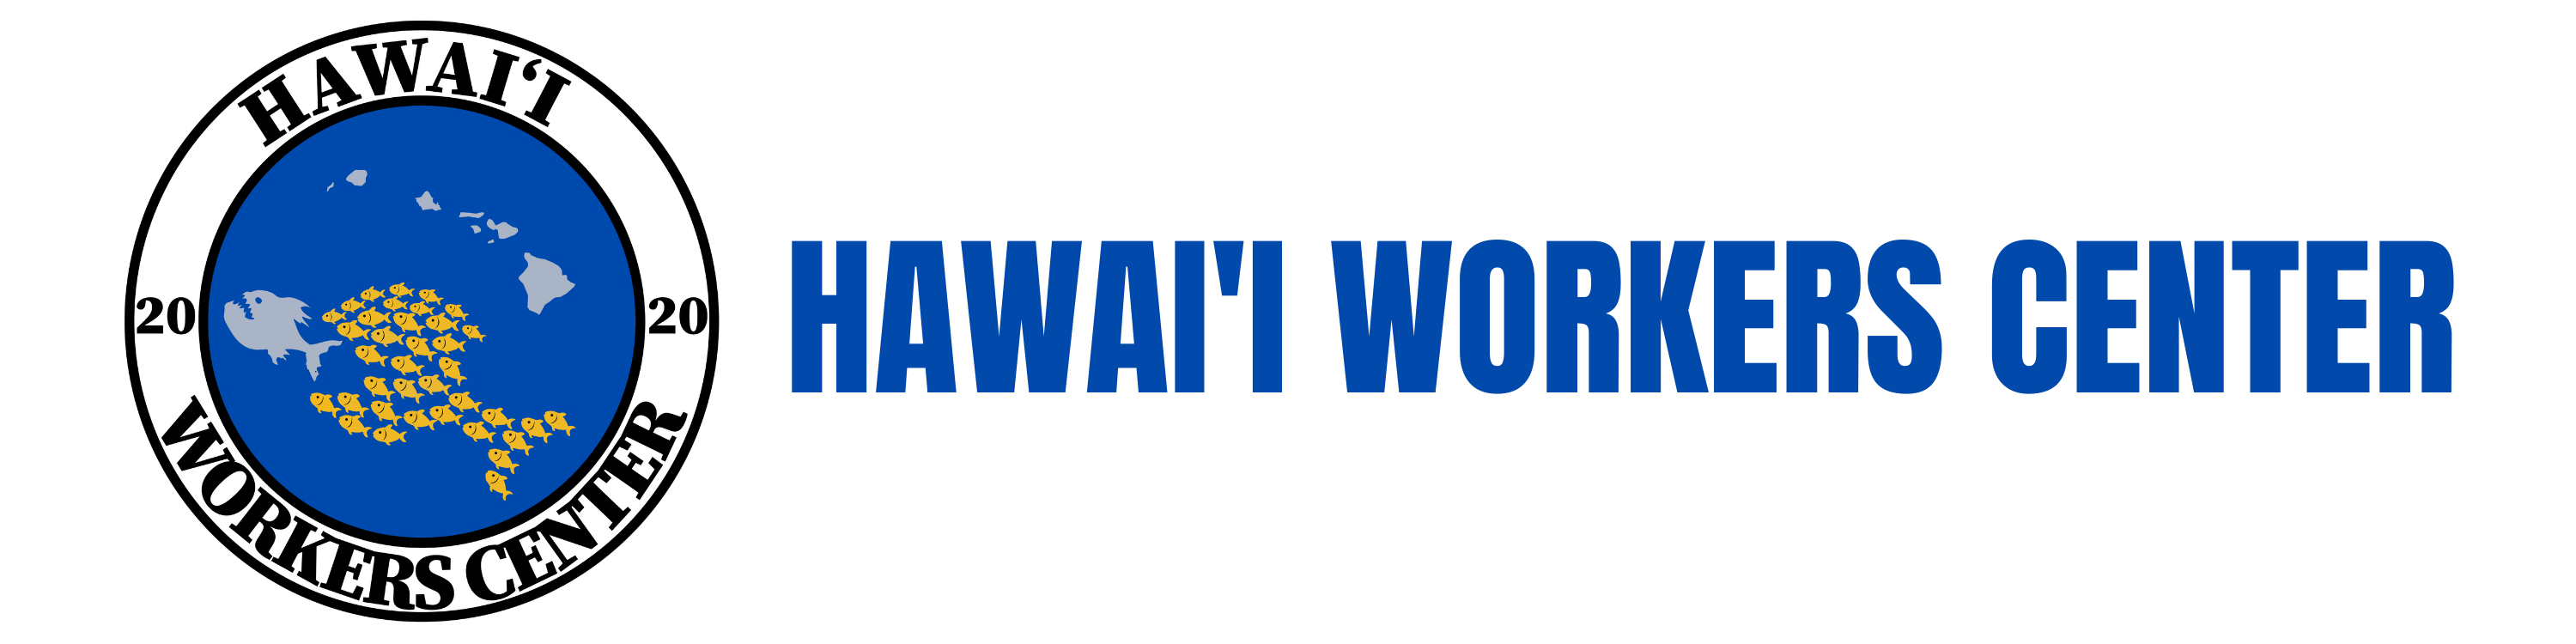 Hawai'i Workers Center